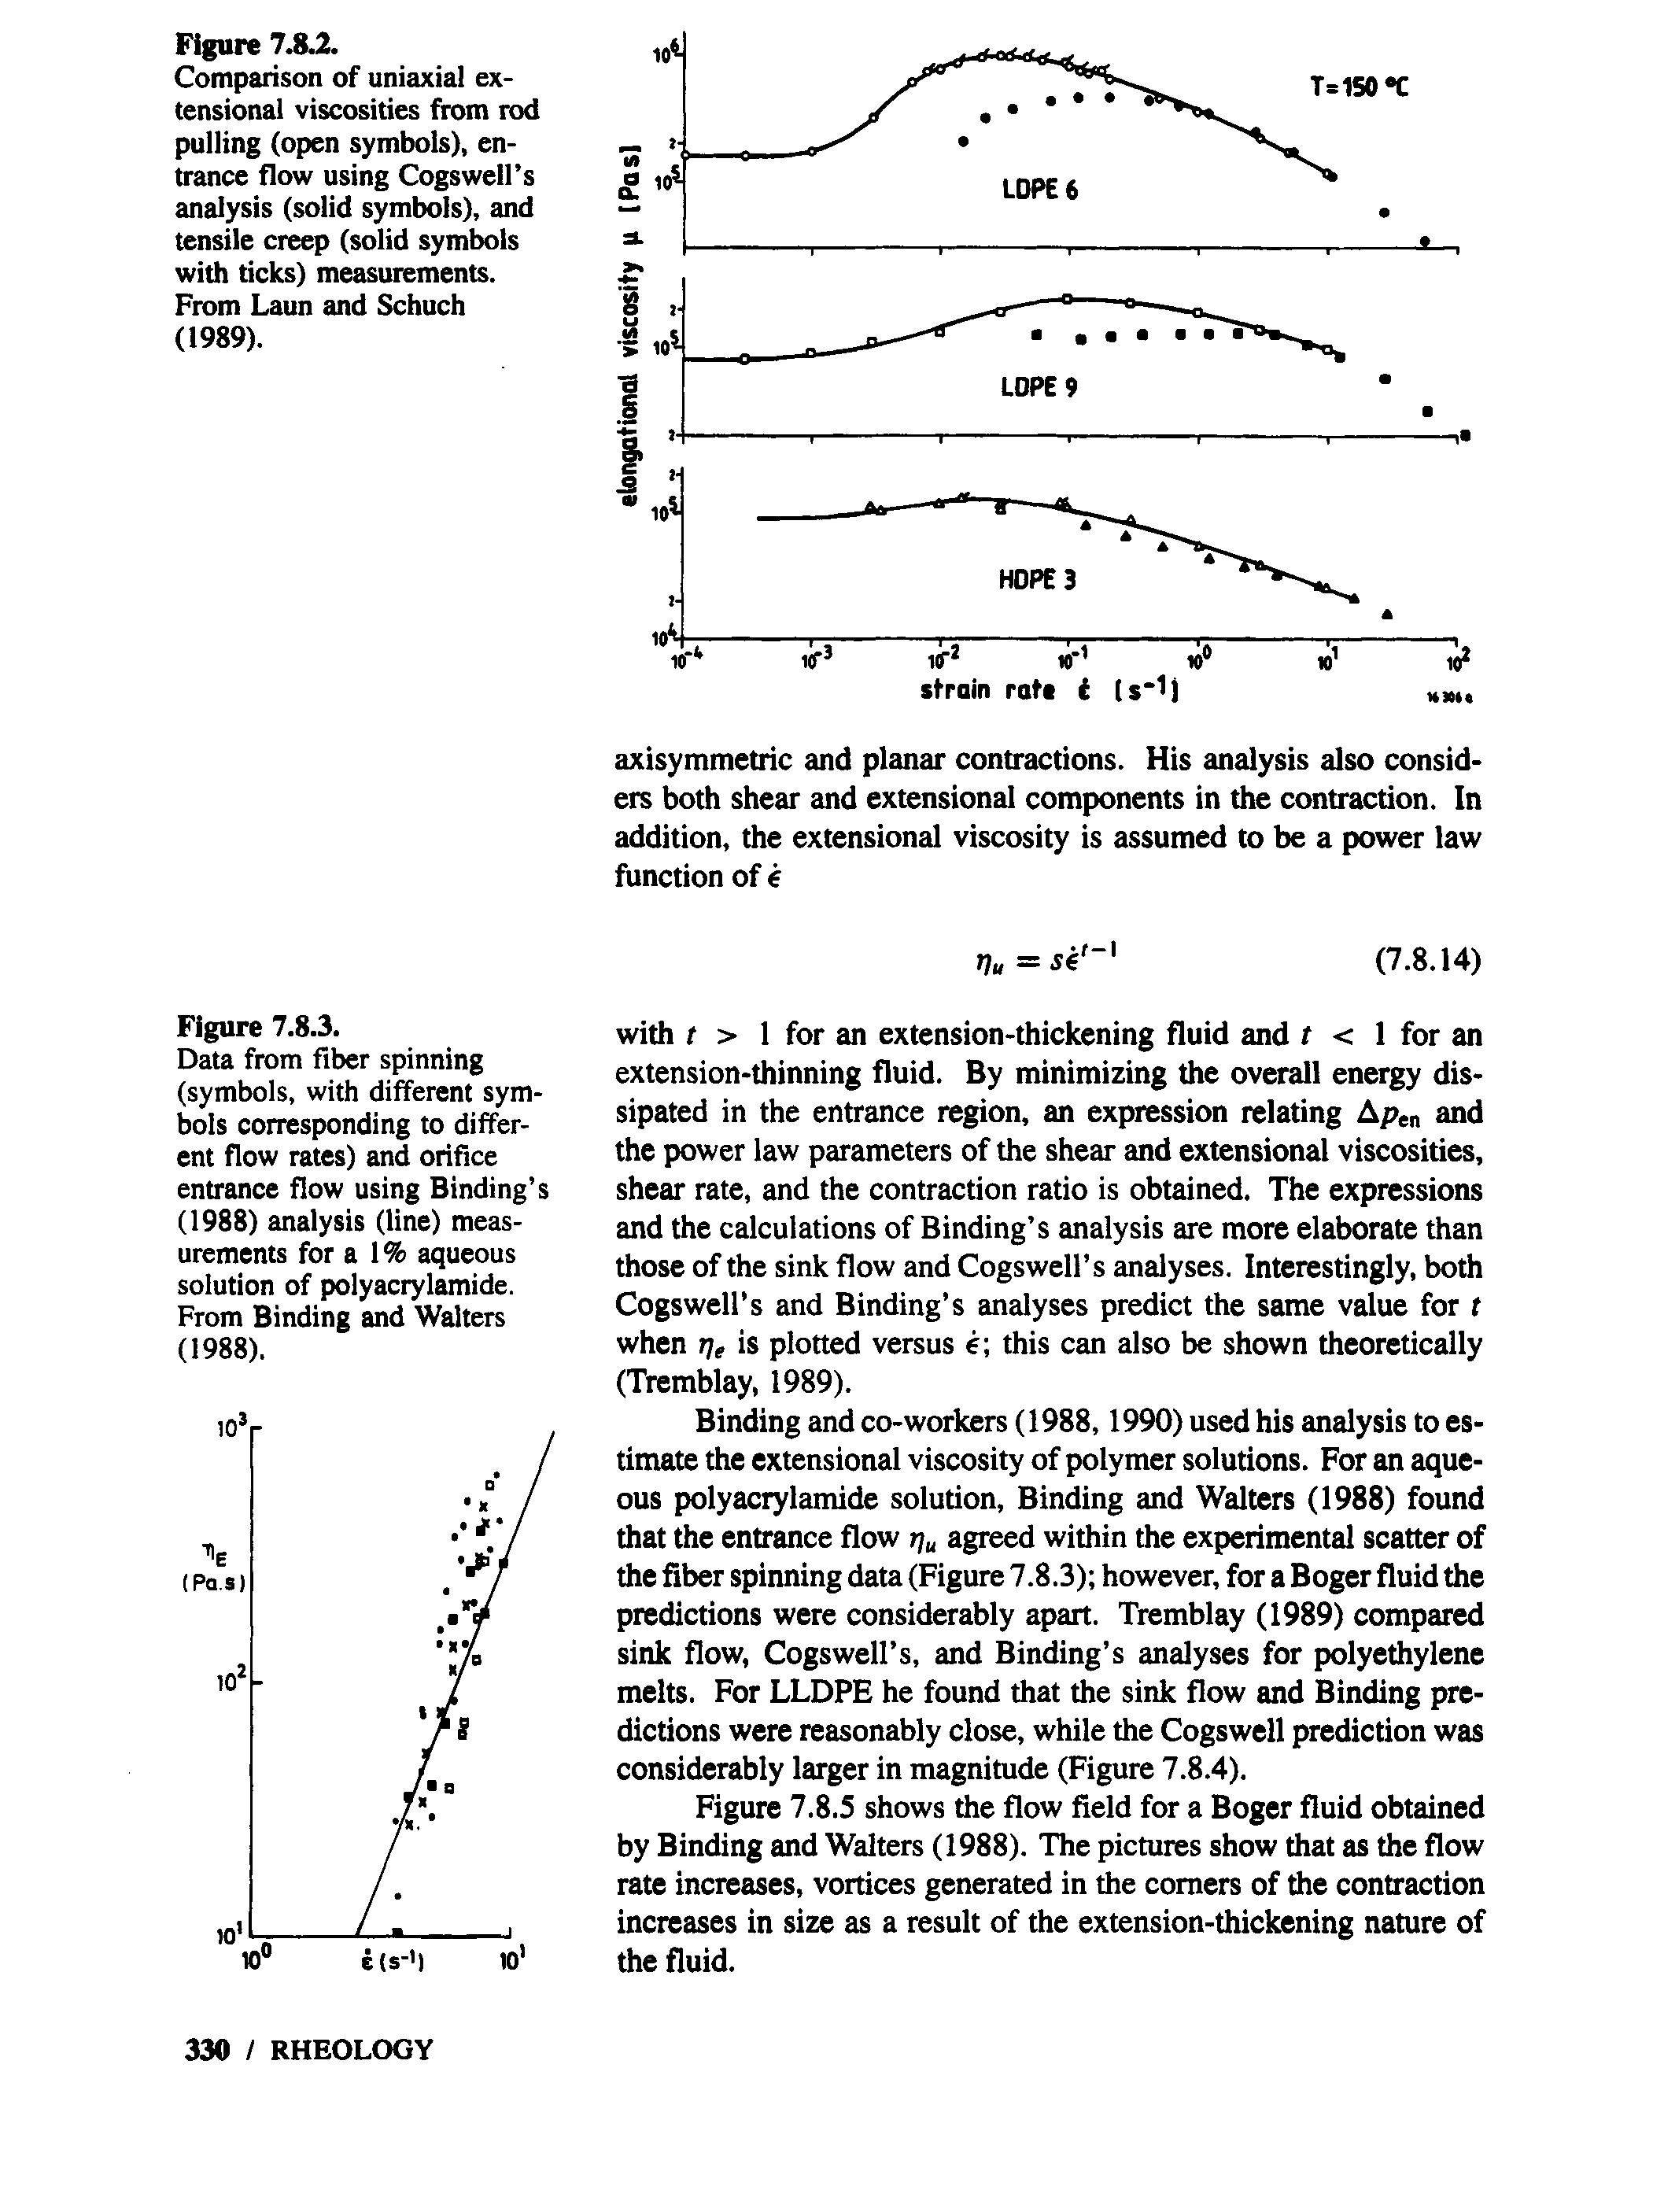 Figure 7.8.S shows the flow field for a Boger fluid obtained by Binding and Walters (1988). The pictures show that as the flow rate increases, vortices generated in the comers of the contraction increases in size as a result of the extension-thickening nature of the fluid.